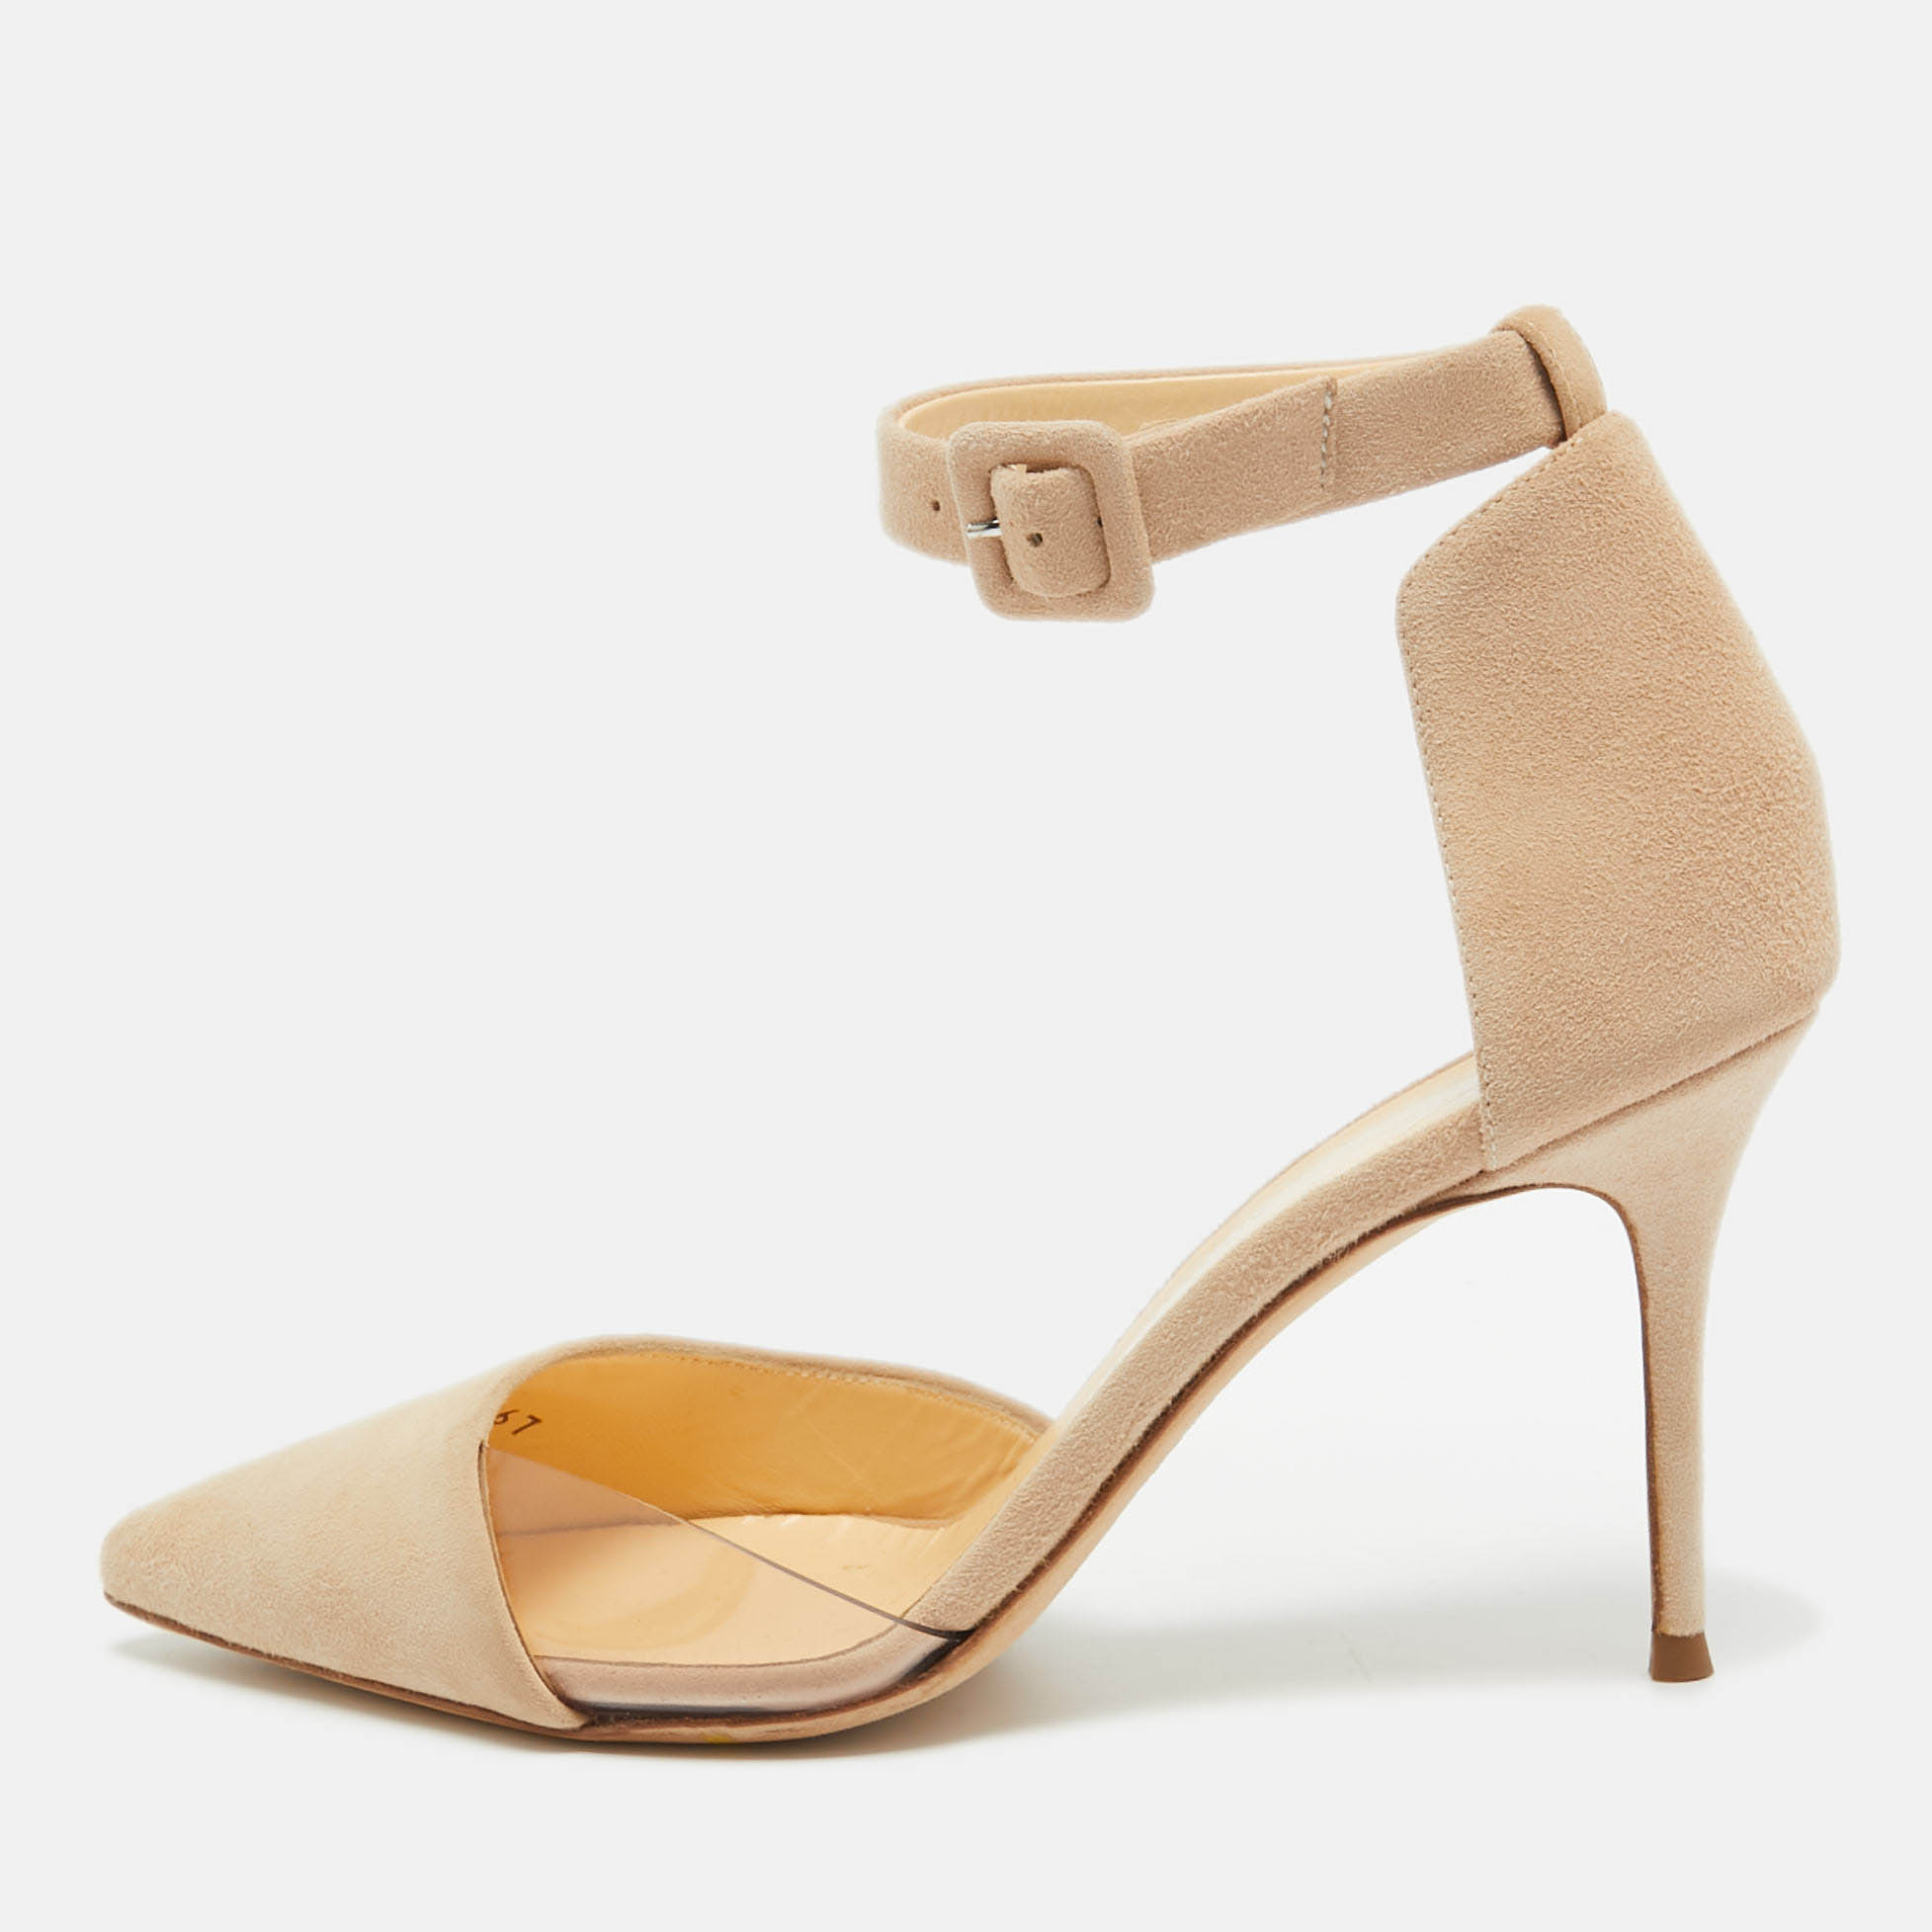 Giuseppe zanotti beige suede and pvc ankle strap pumps size 36